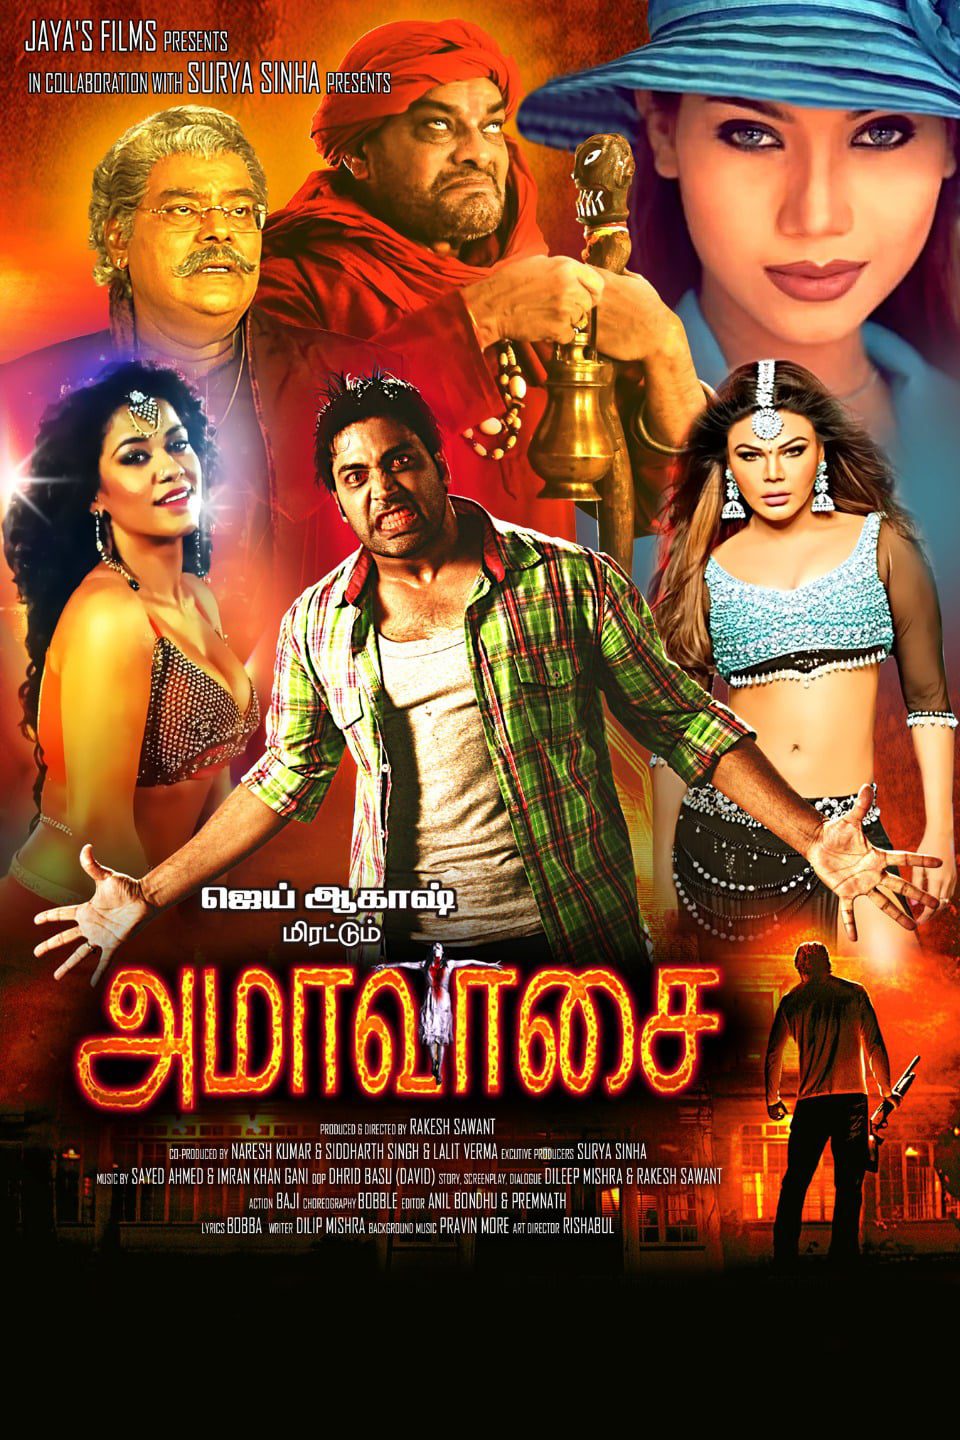 Poster for the movie "Amaavasai"